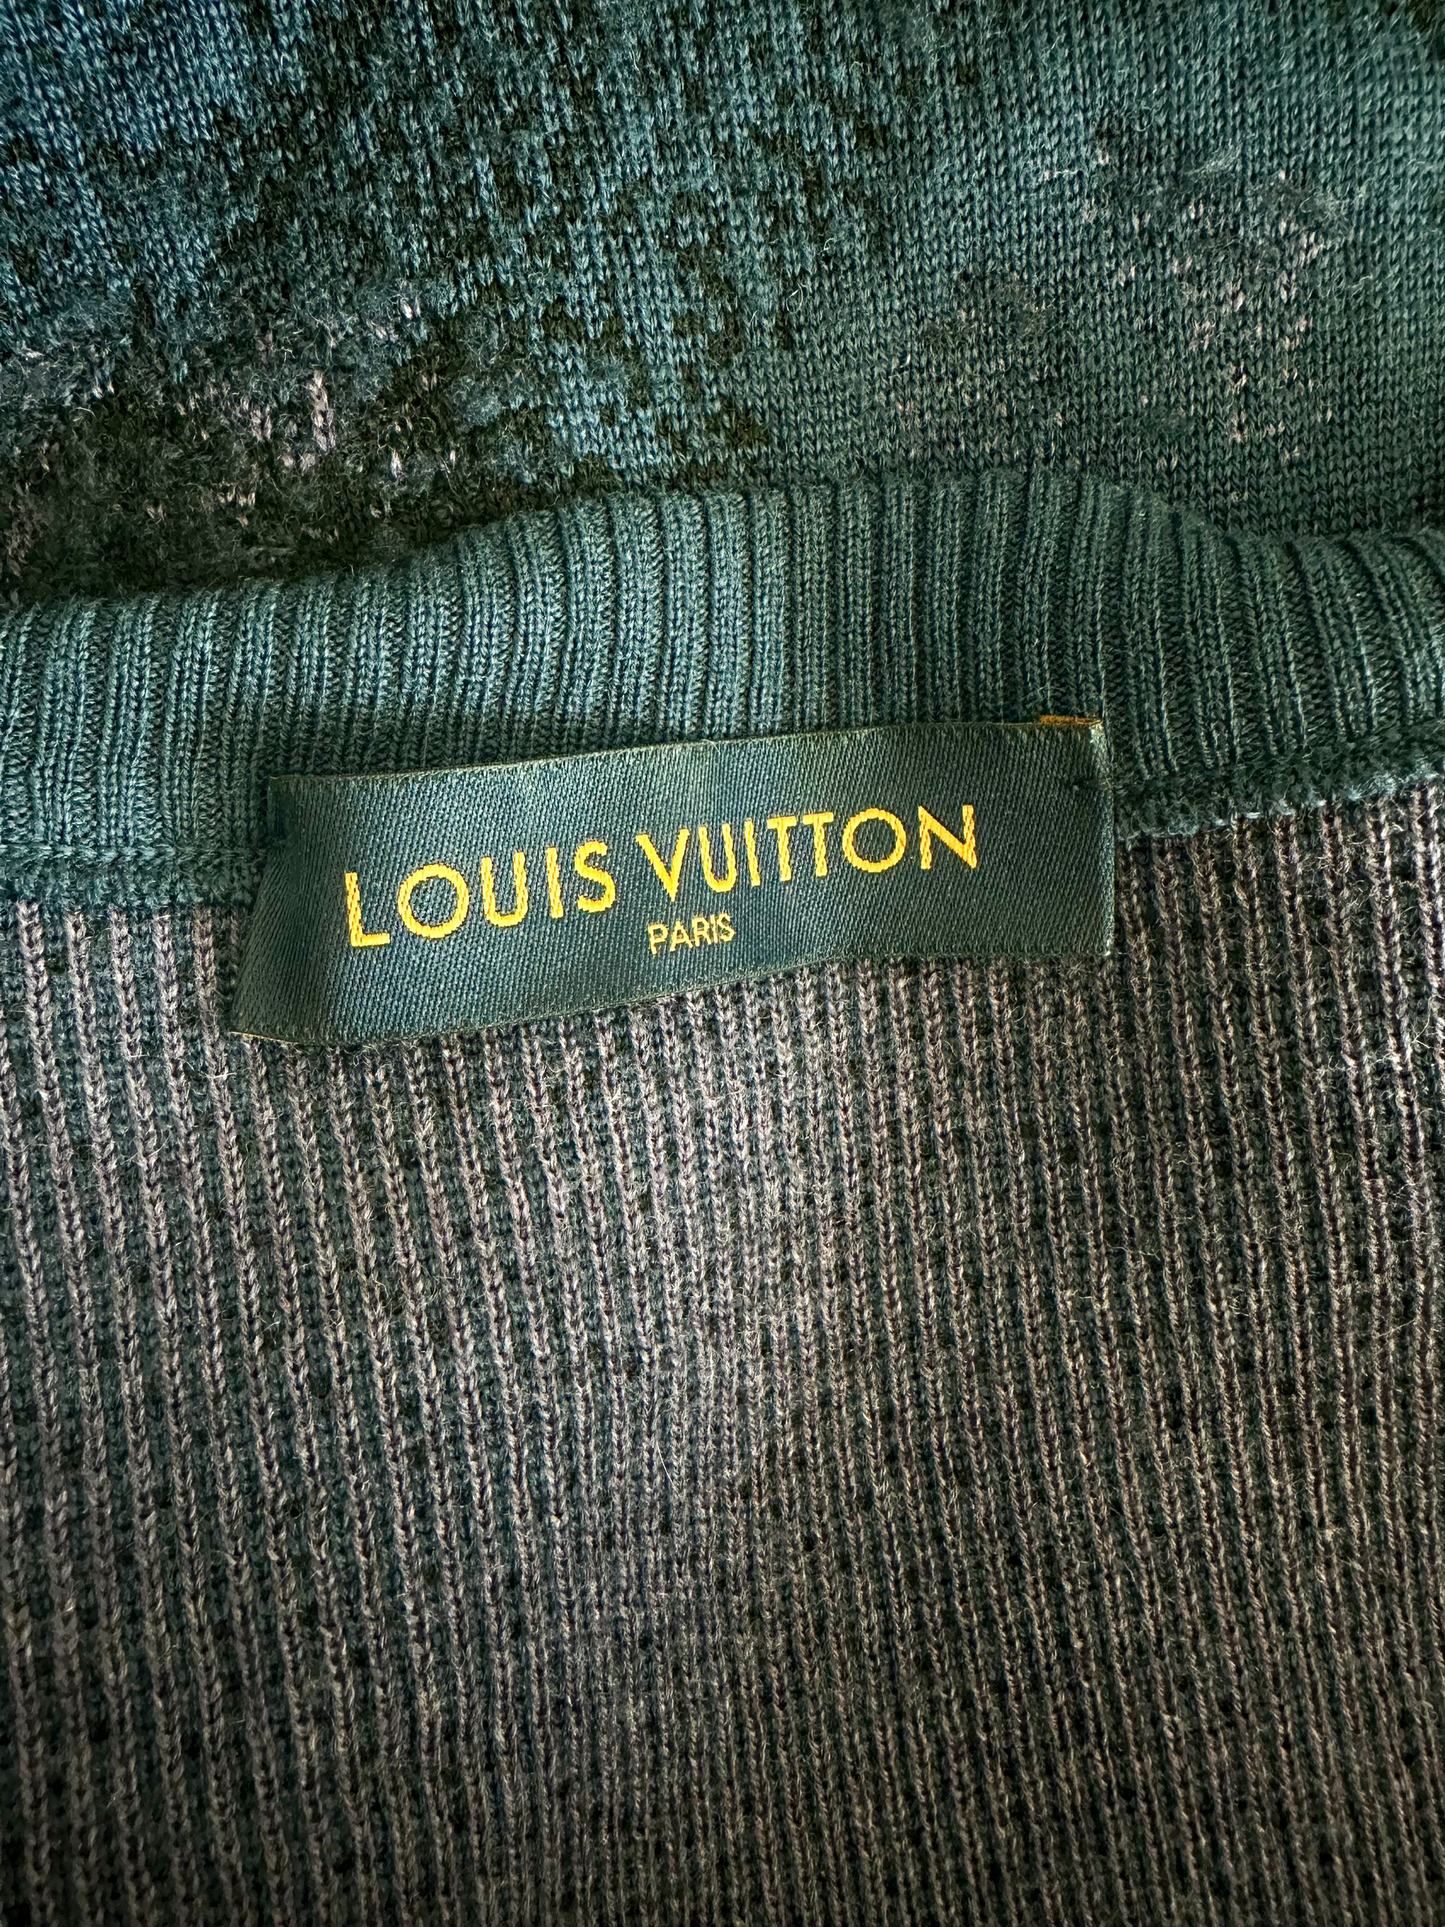 Louis Vuitton Yellow Brick Road Sweater - Blue Sweaters, Clothing